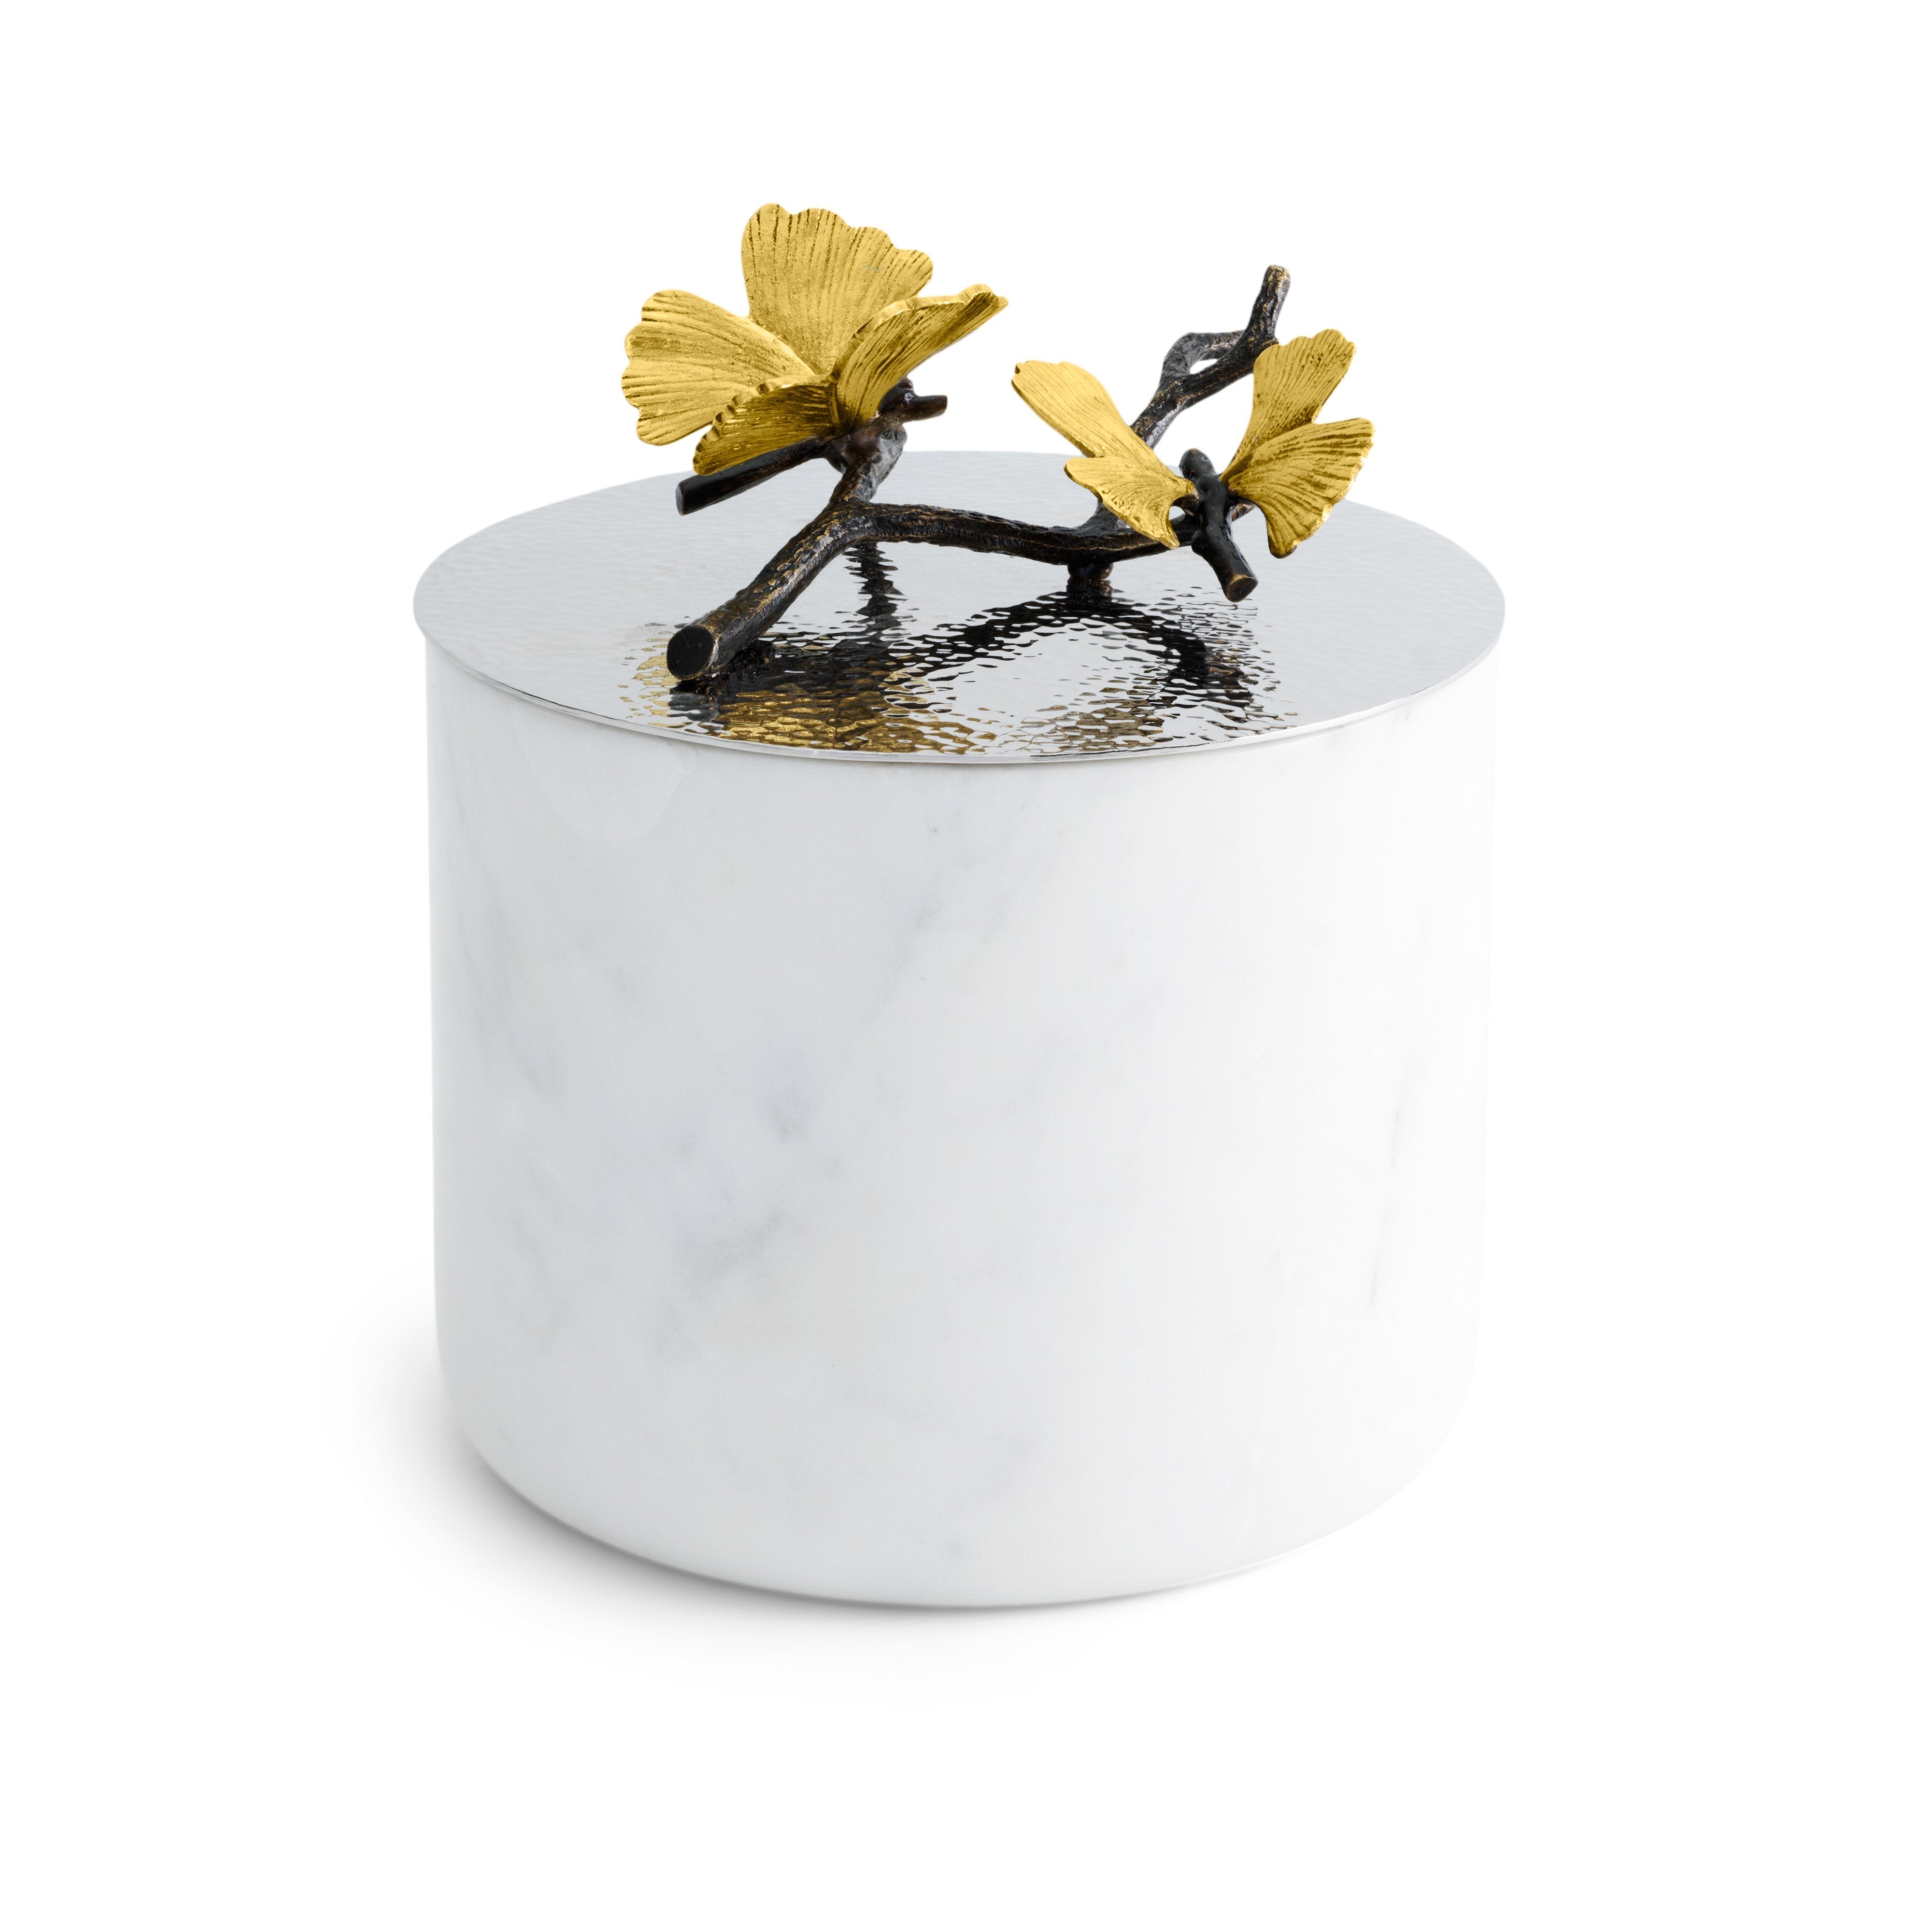 Michael Aram Butterfly Ginkgo Marble Candle